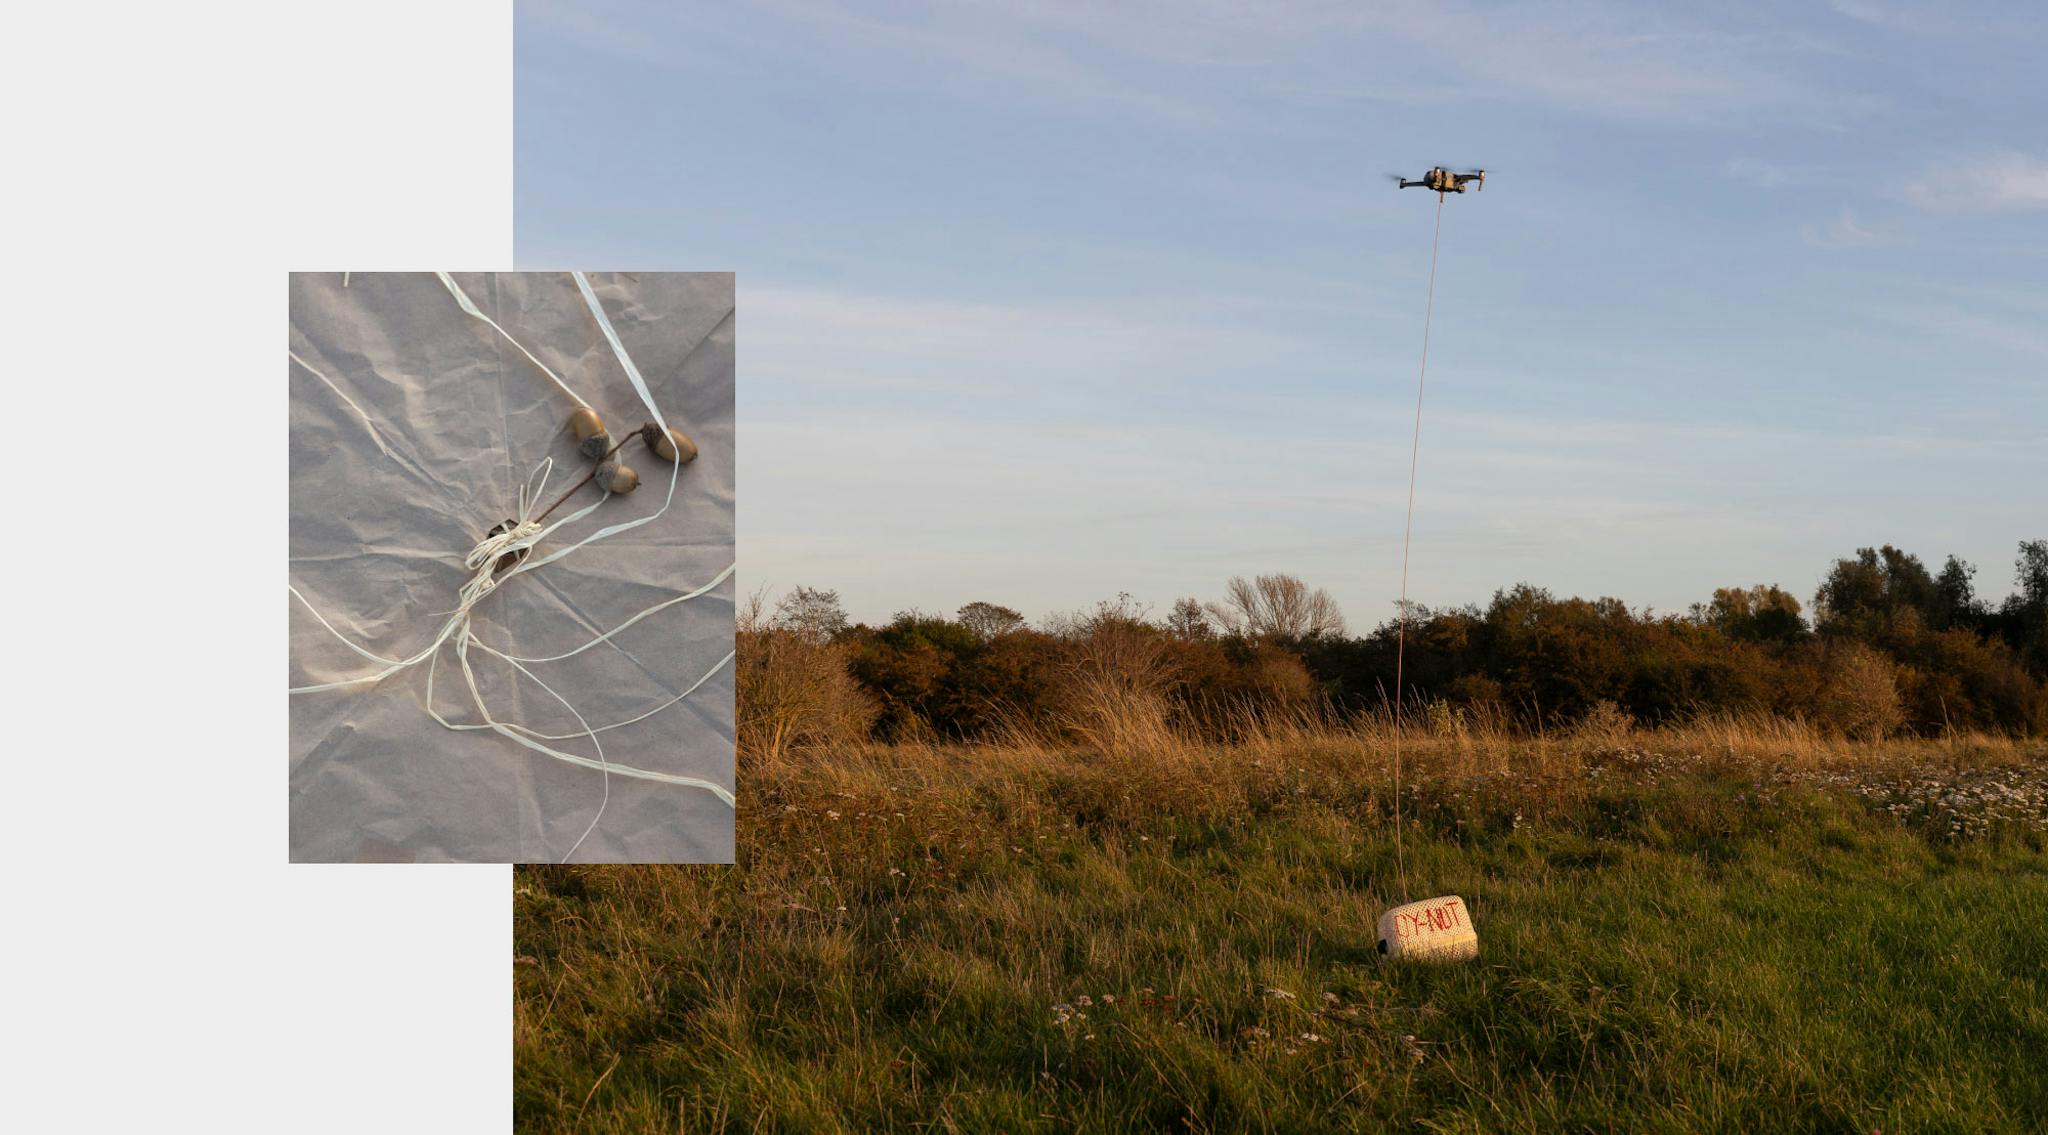 Two images: on the right is a drone lifting a basket from a field. On the left is a close up of acorns on paper with string. 